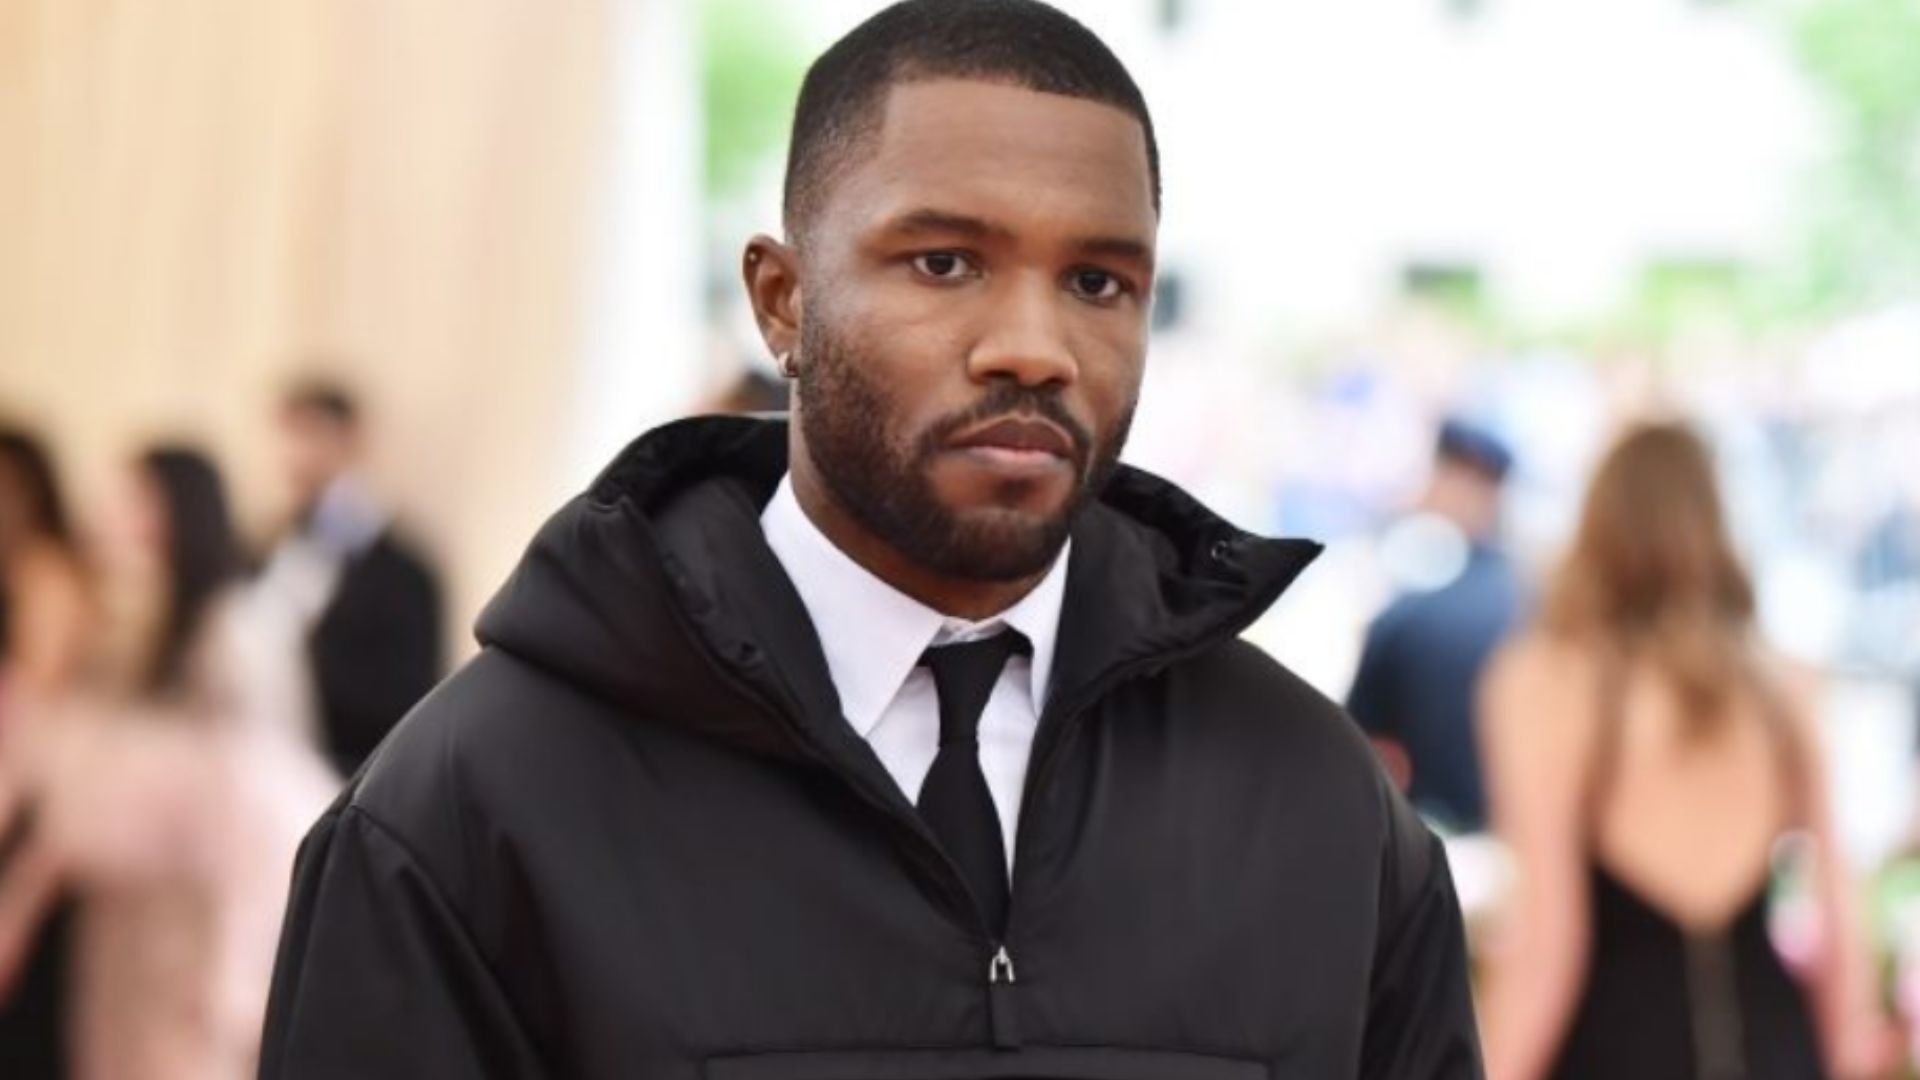 Frank Ocean shares new music for 10th anniversary of Channel Orange